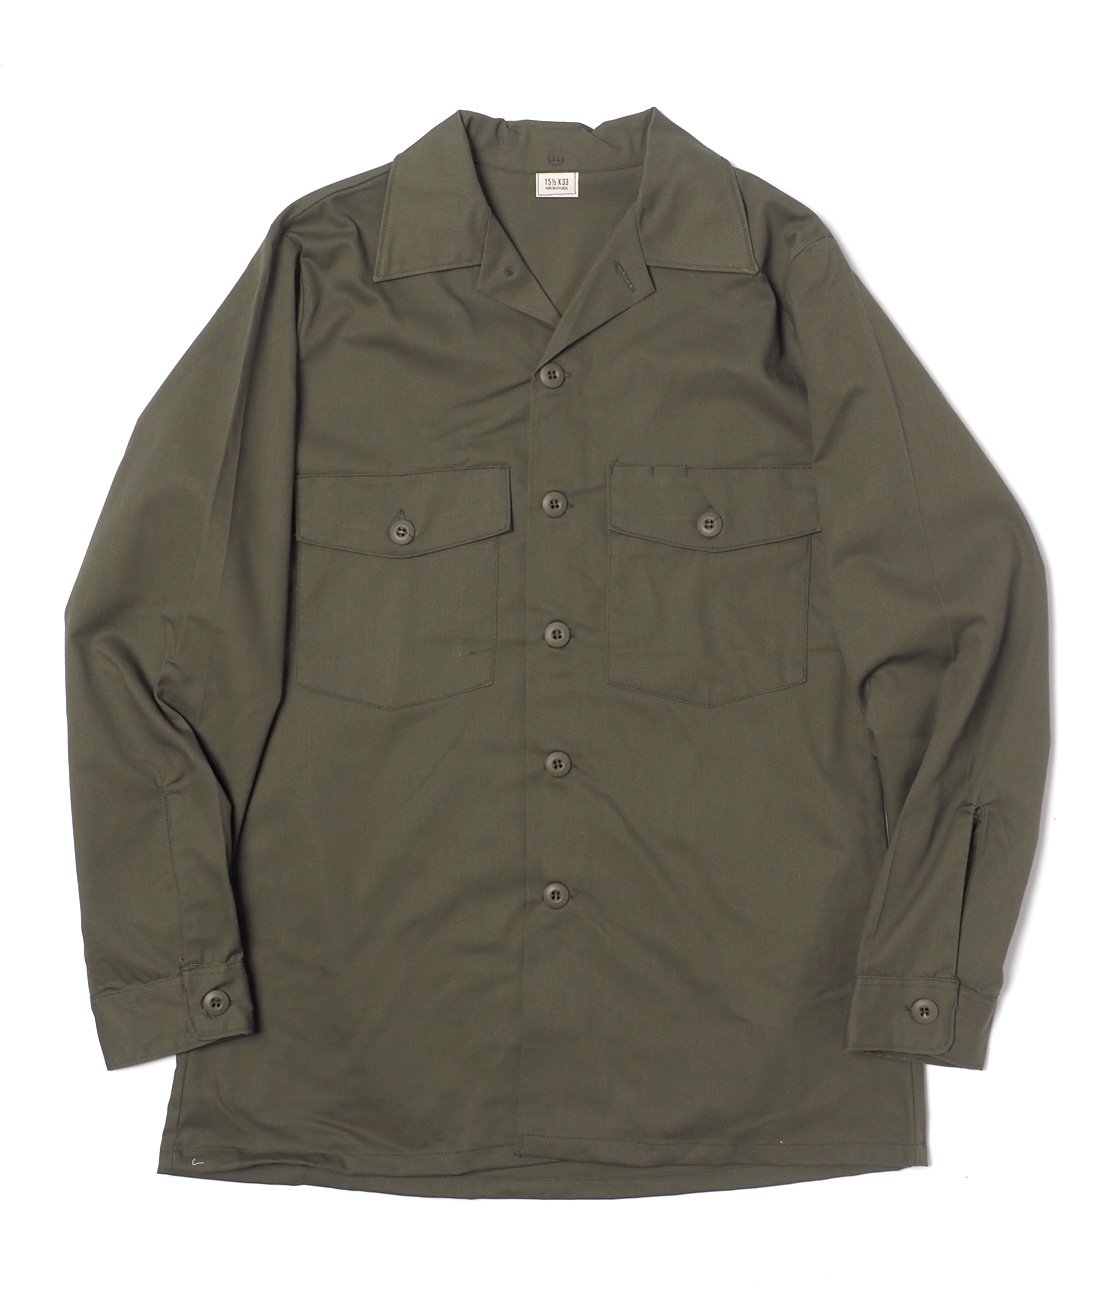 DEAD STOCK】80s US ARMY UTILITY SHIRT - OLIVE GREEN 米軍 ...